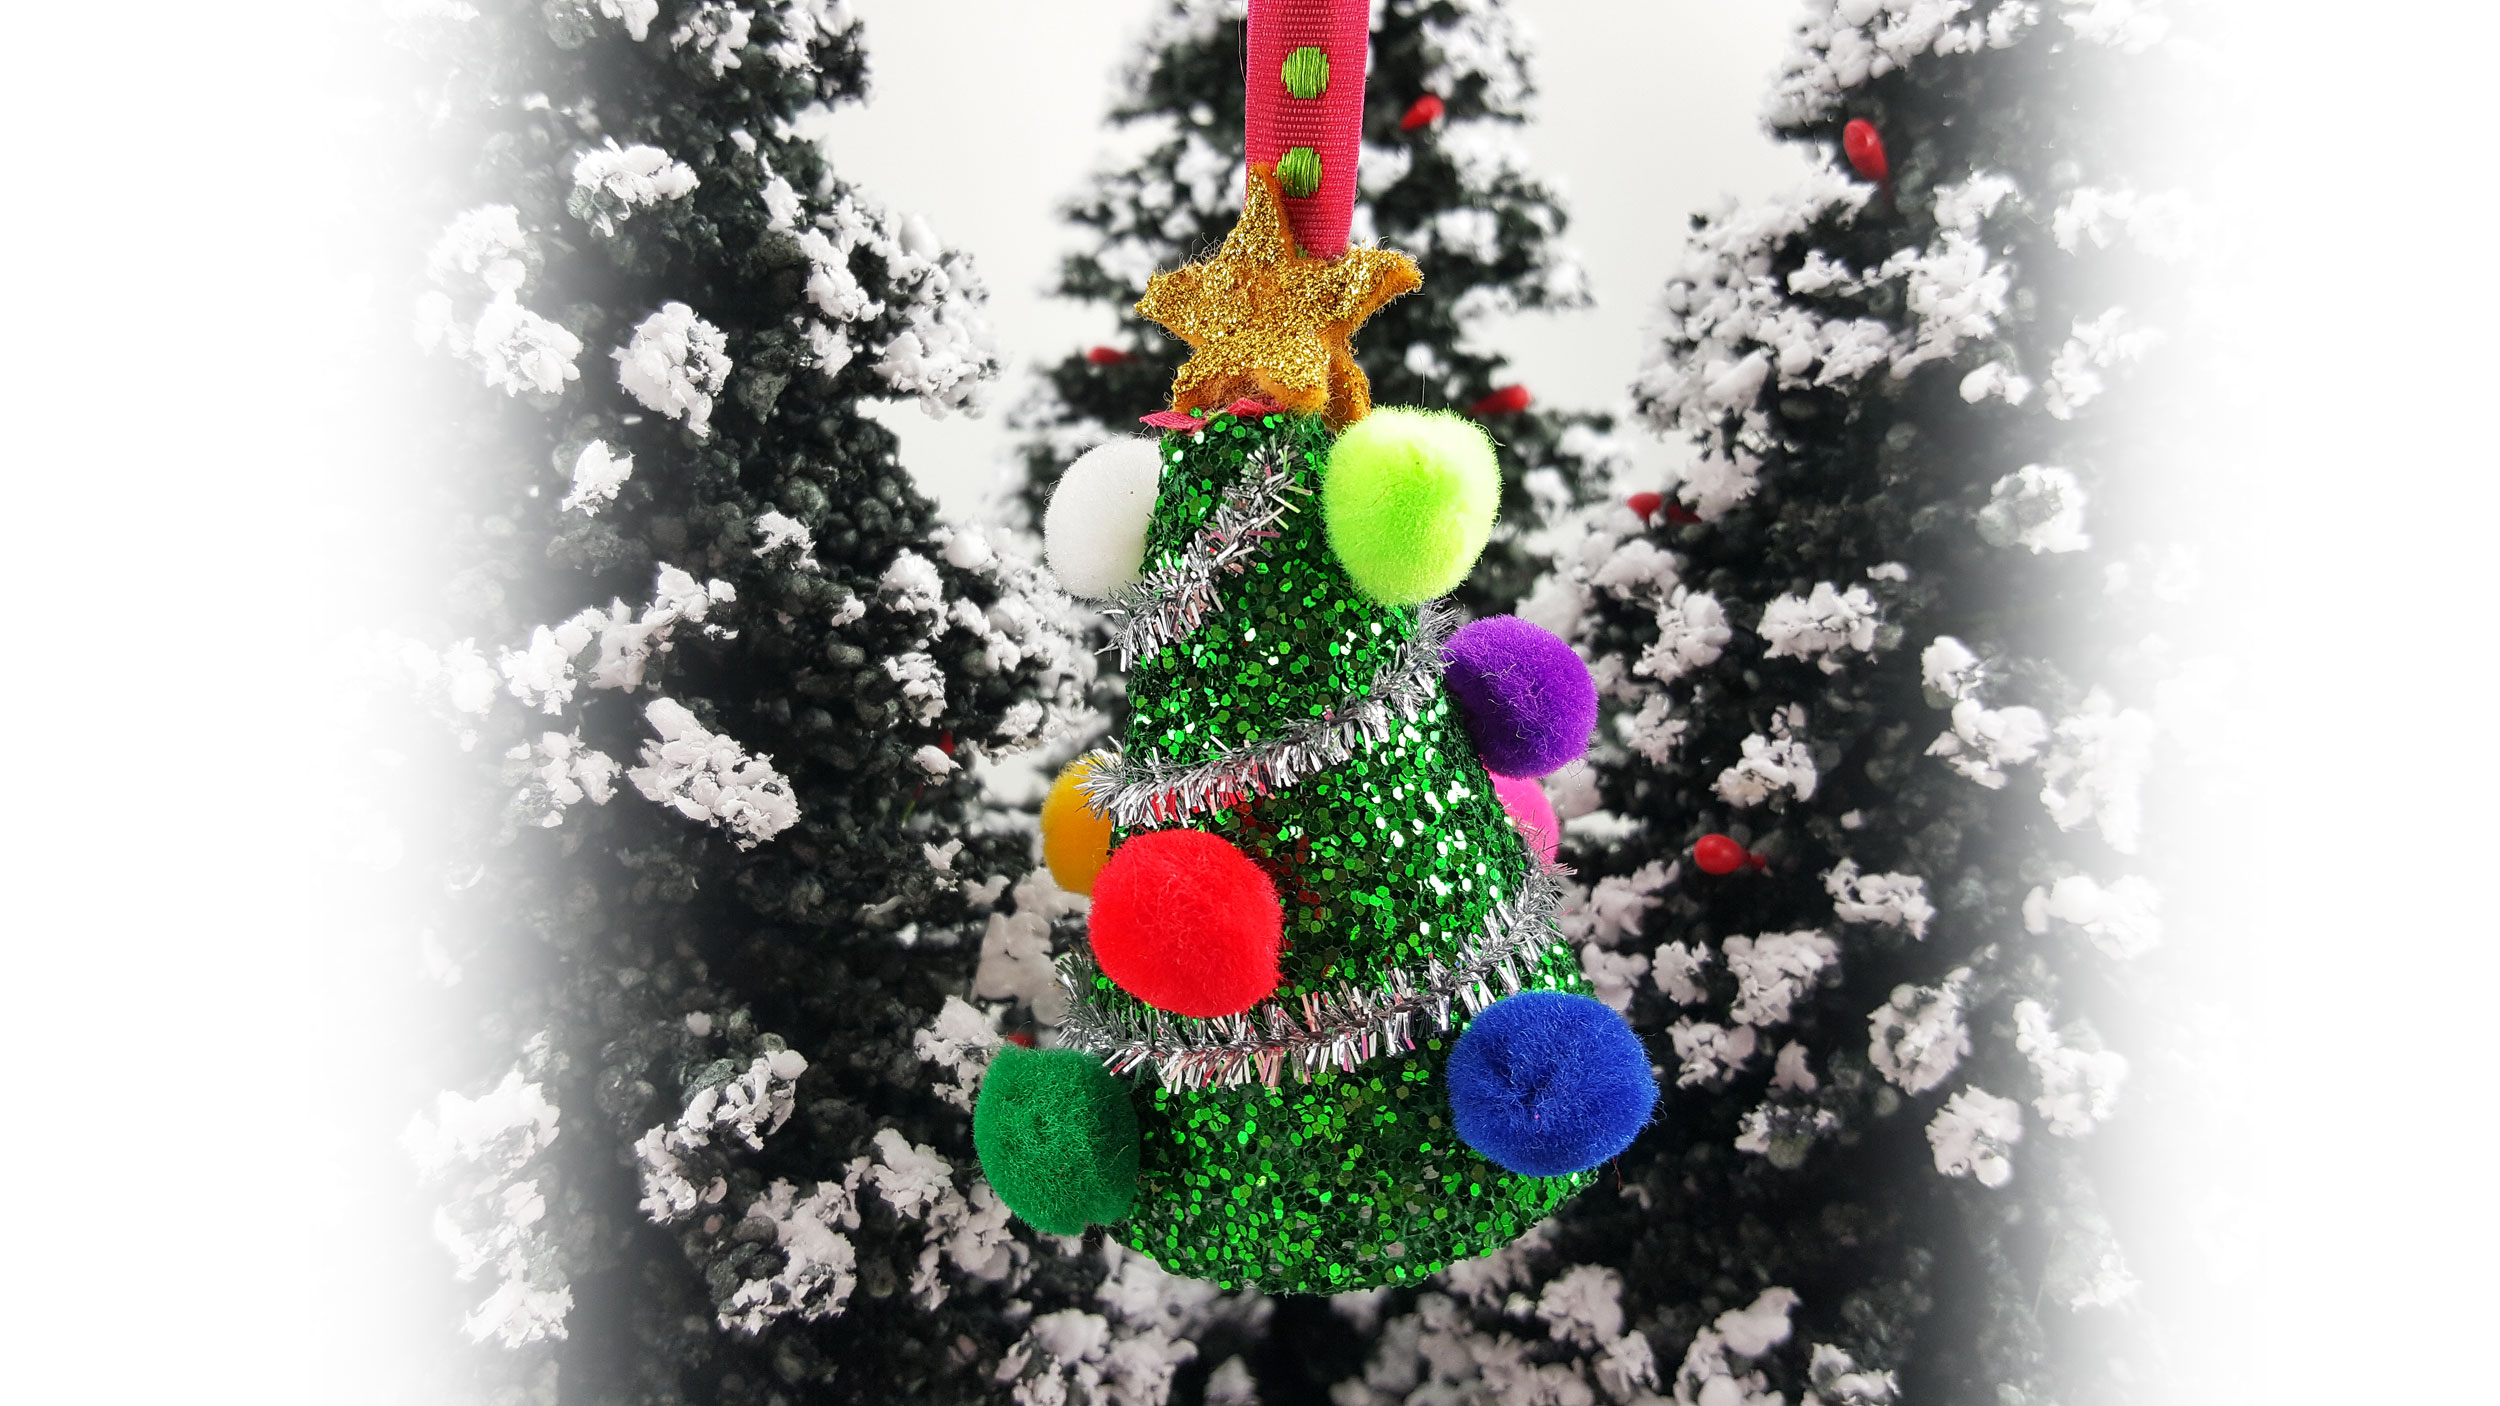 A Christmas crafts For kids. A DIY miniature Christmas tree with glitter and pom poms to hang as an ornament. | OrnamentShop.com